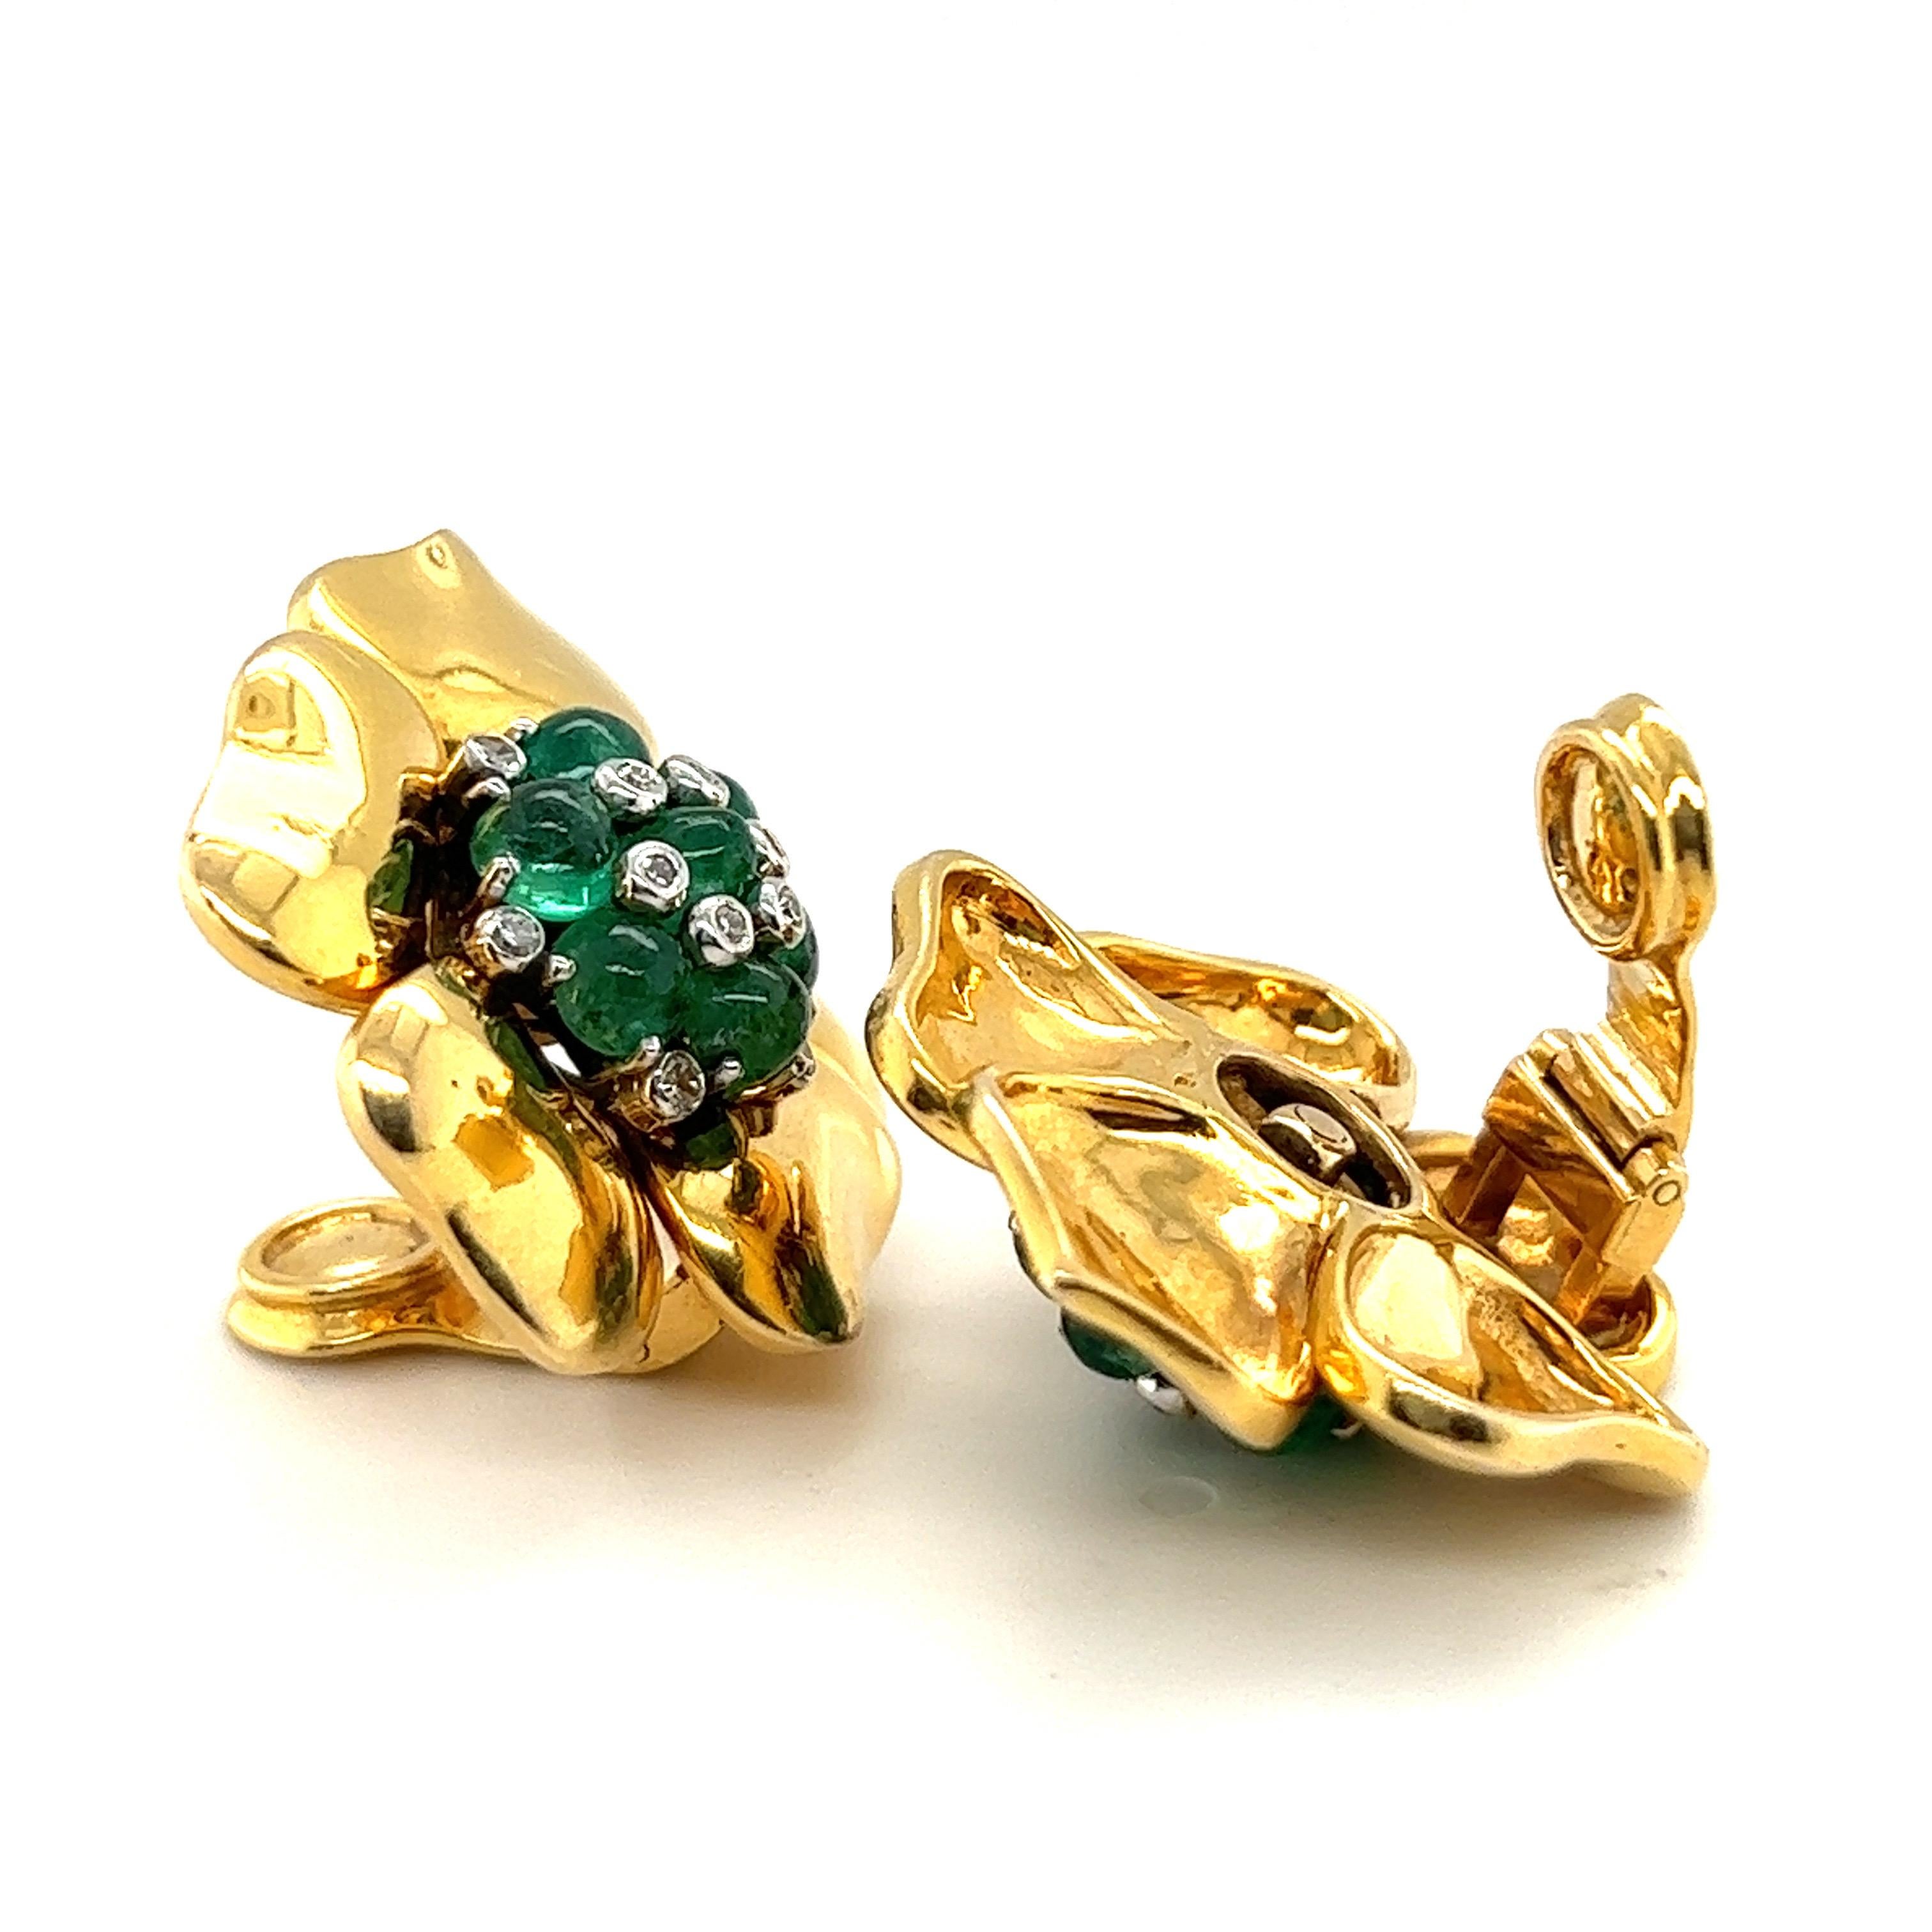 Trabert & Hoeffer Mauboussin 14 Karat Gold Emerald and Diamond Retro Earclips In Good Condition For Sale In Zurich, CH